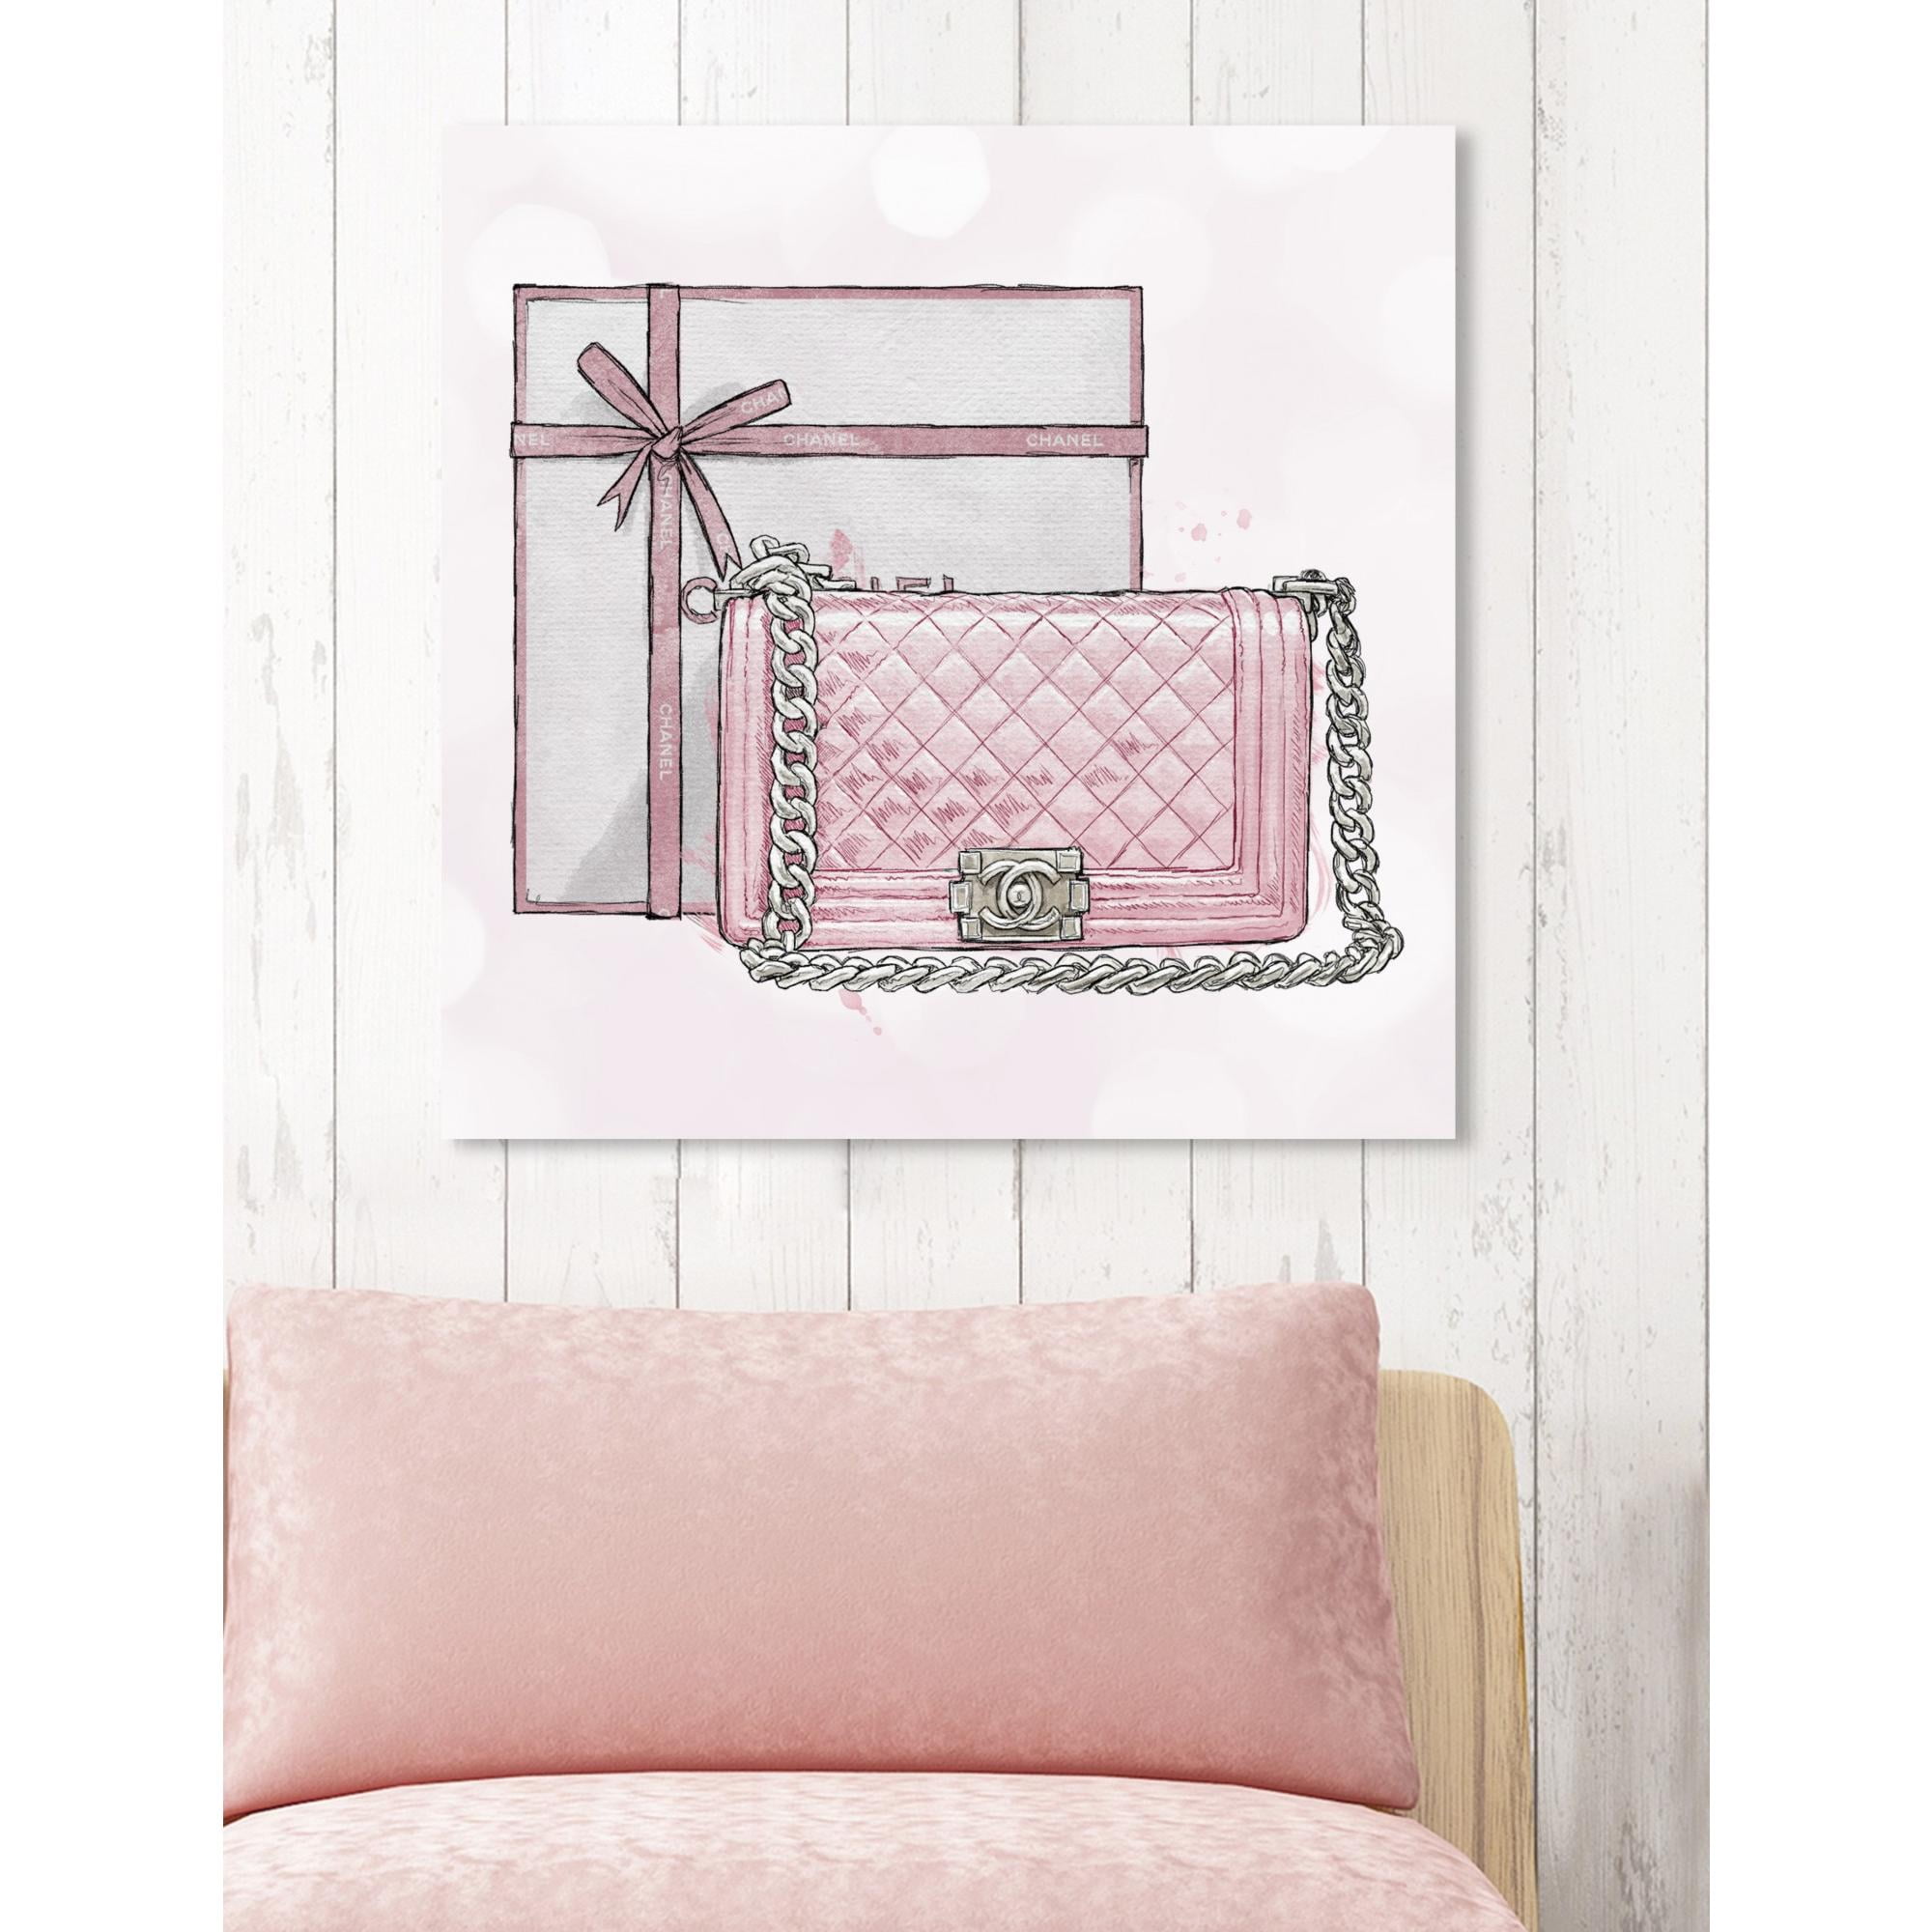 Everly Quinn Fashion Sketchbook VI Hot Pink On Canvas by Anne